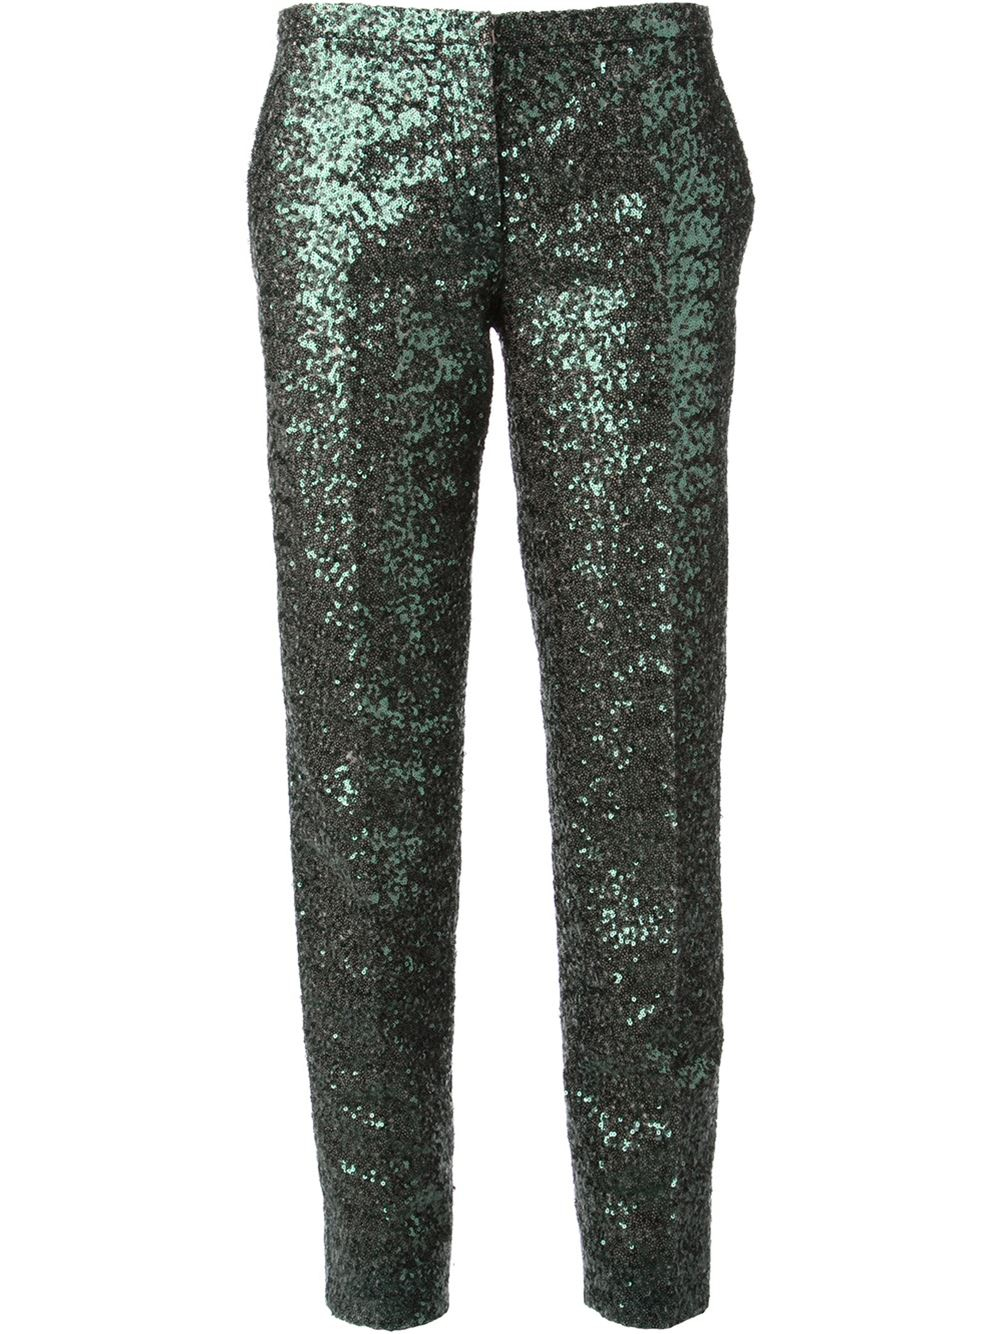 N°21 Sequin Trousers in Green | Lyst